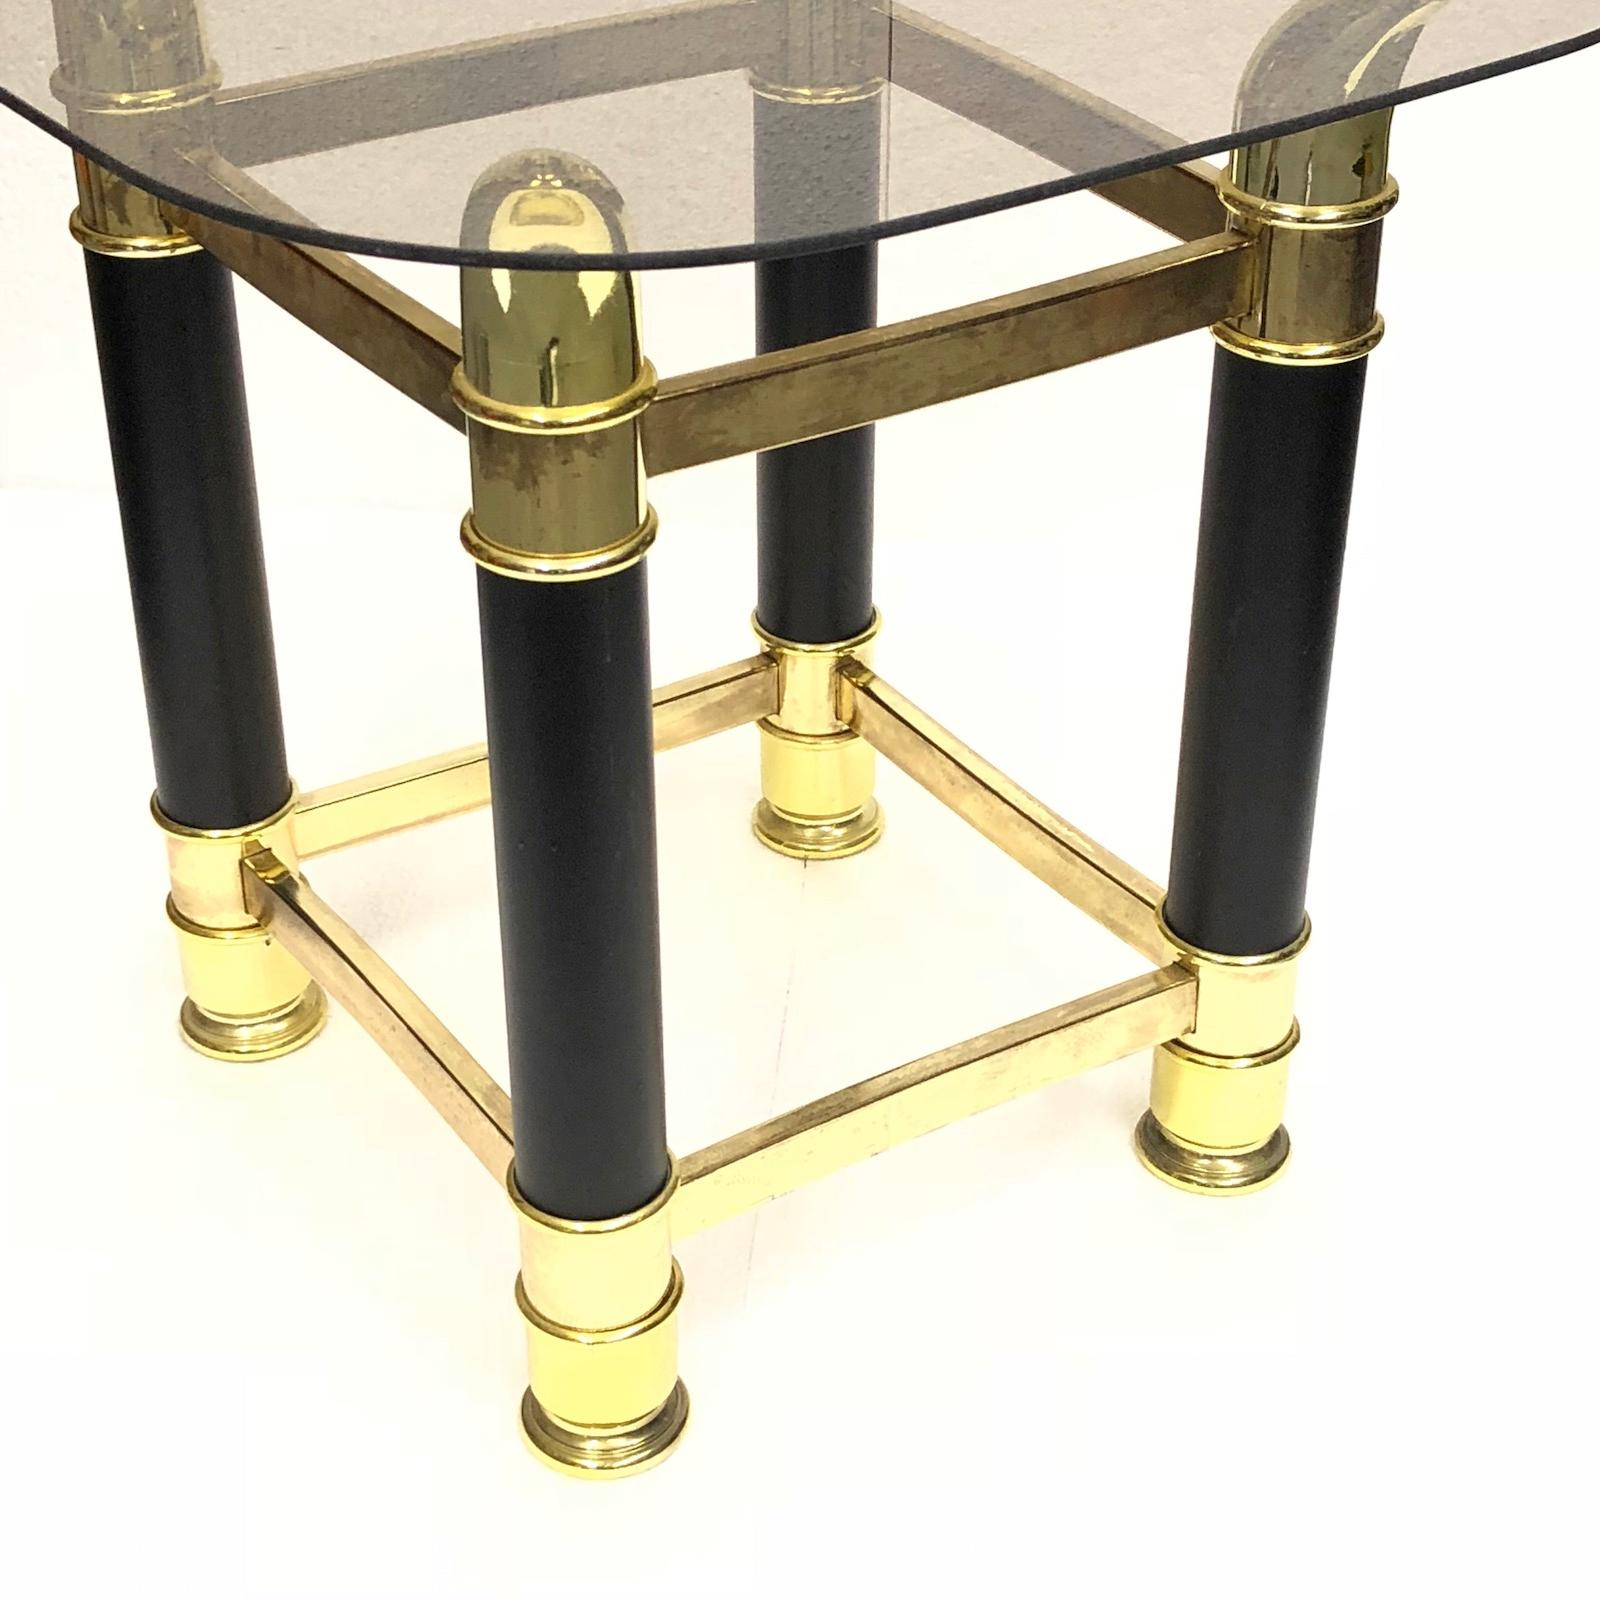 Offered is an absolutely beautiful, 1970s Italian brass and amber glass side table. Minor patina gives this piece a classy statement. a nice addition to any room. 